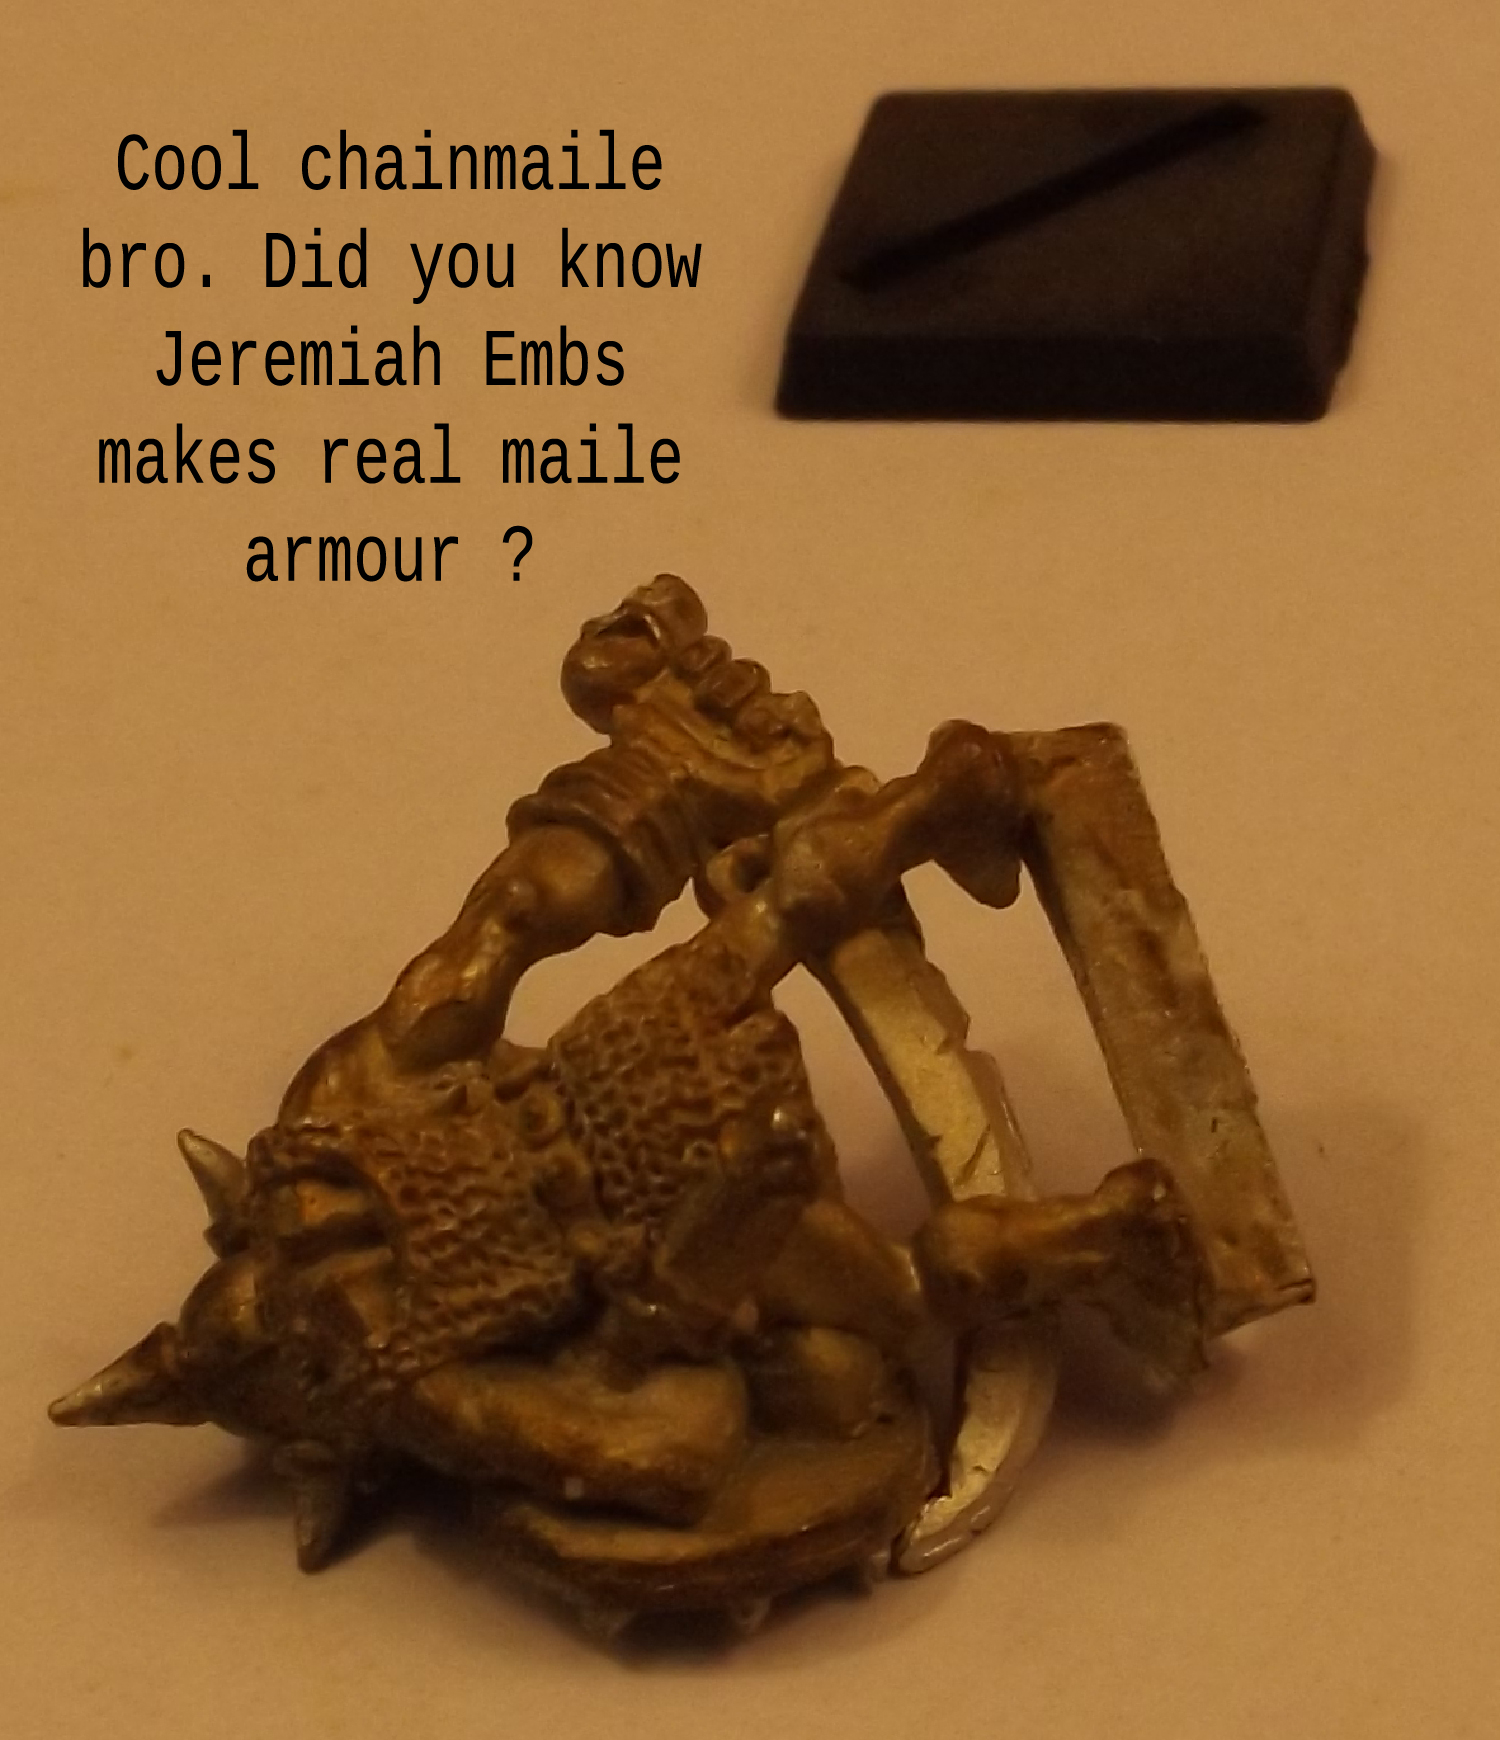 Cool chainmaile. Just like the kind I can make!